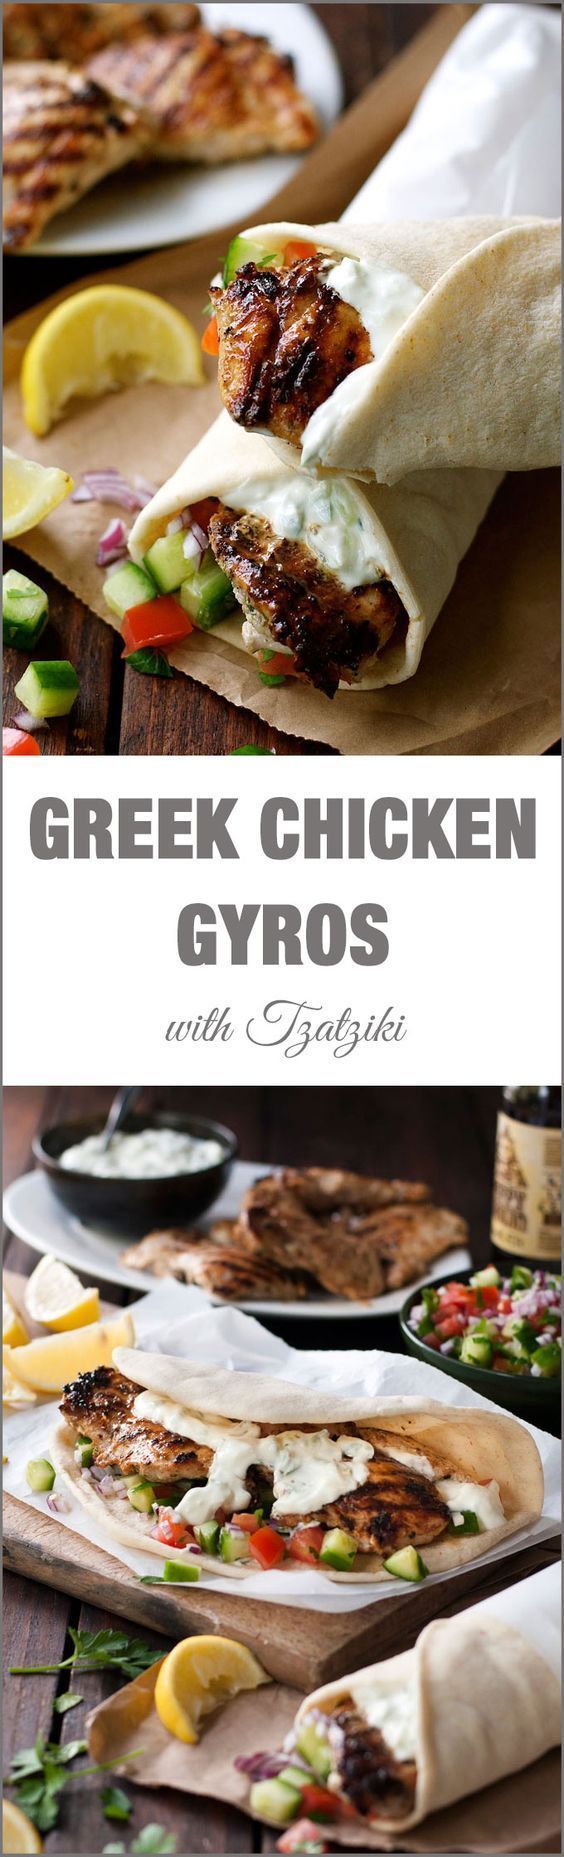 Greek Chicken Gyros with Tzatziki – the marinade for the chicken is so good, I use it even when Im not making gyros!